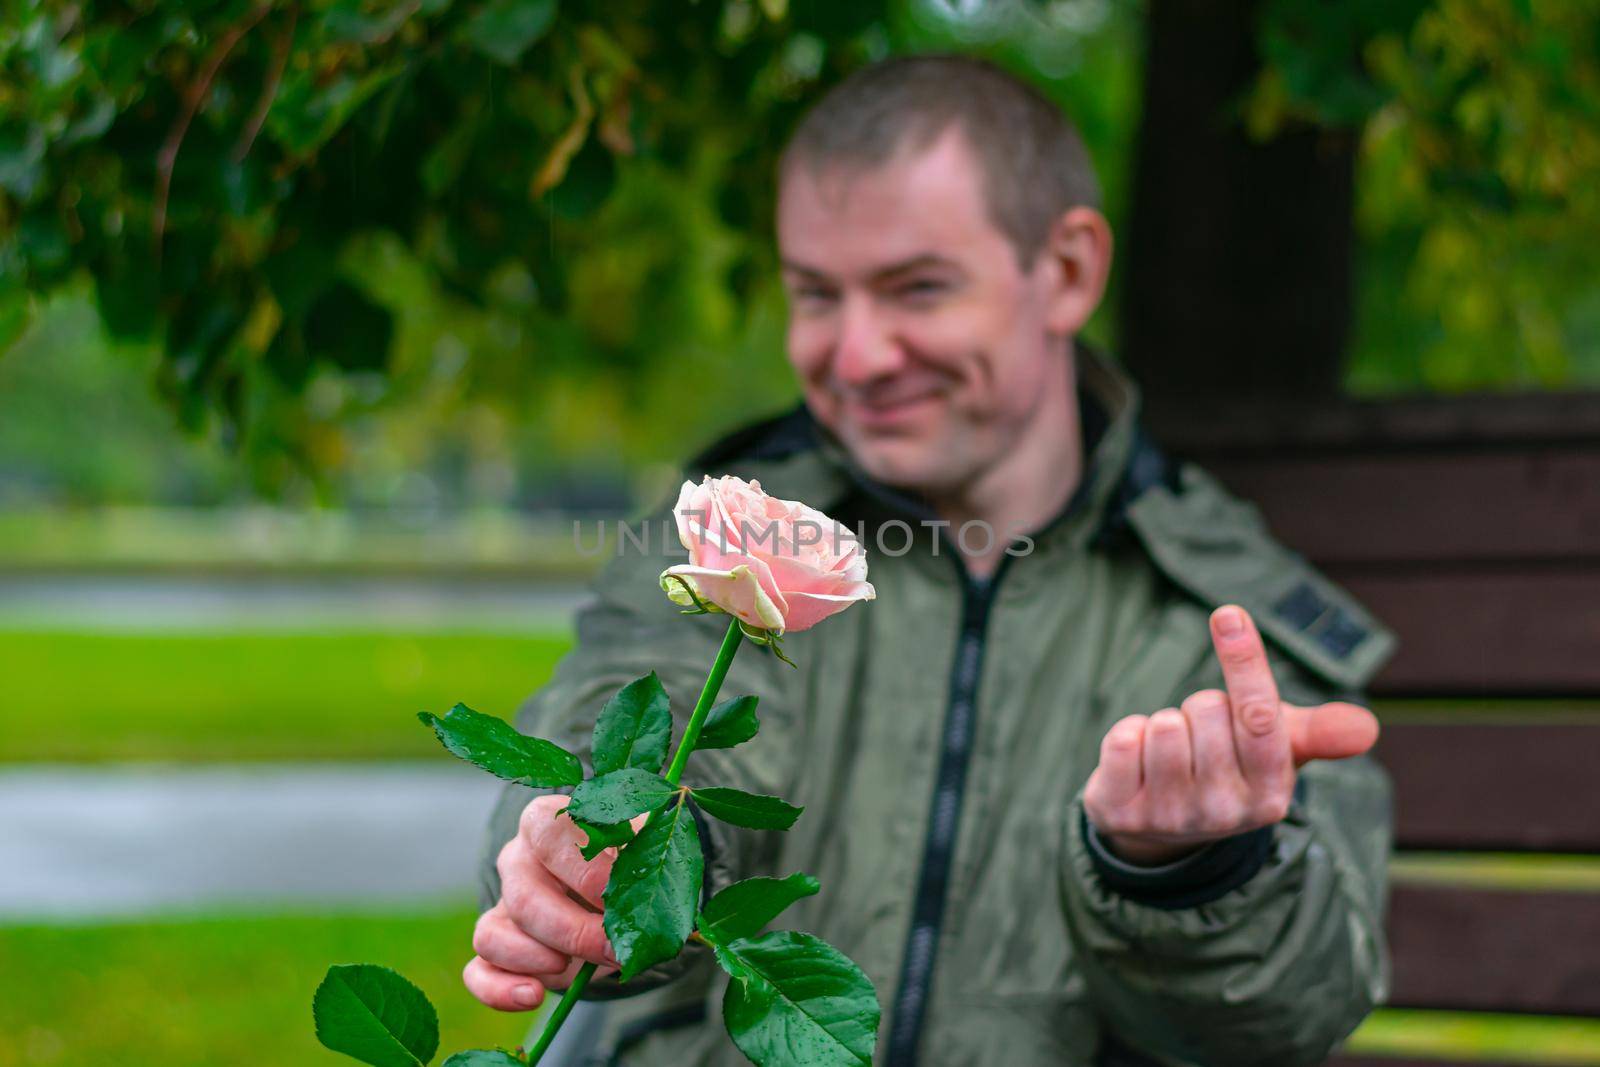 A rose in the hands of a smiling guy who beckons someone to him in rainy weather